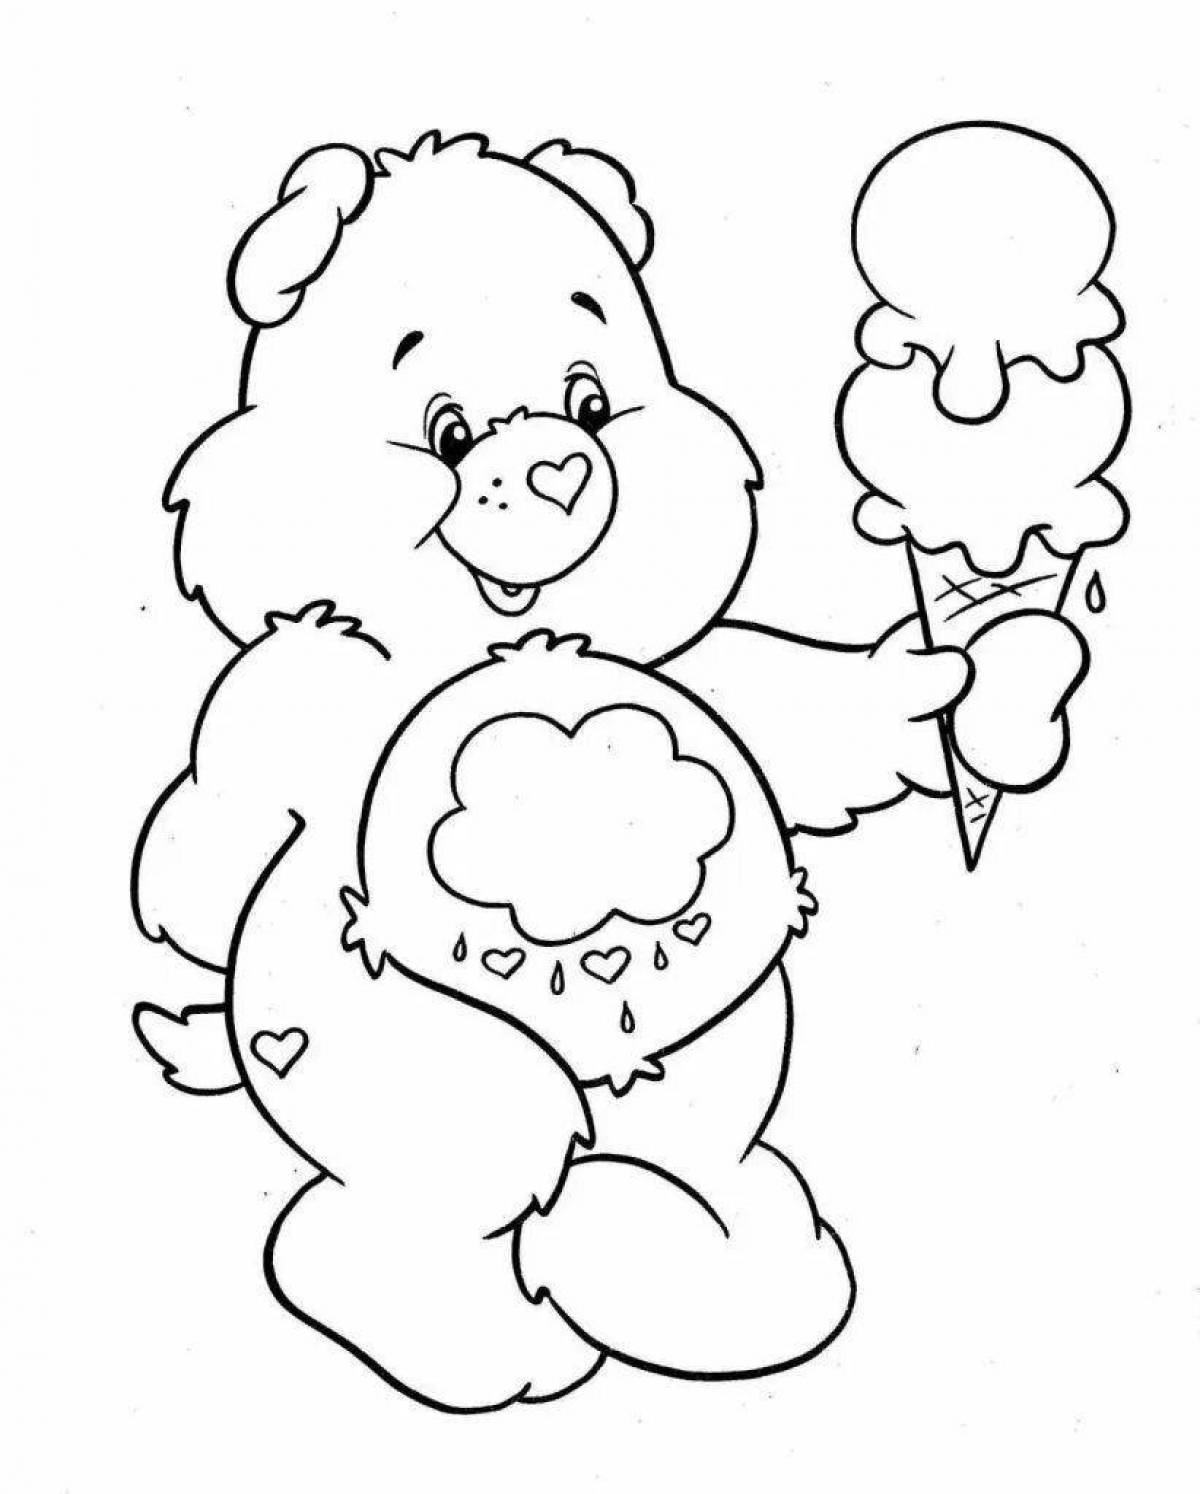 Colorful and hugging teddy bear coloring book